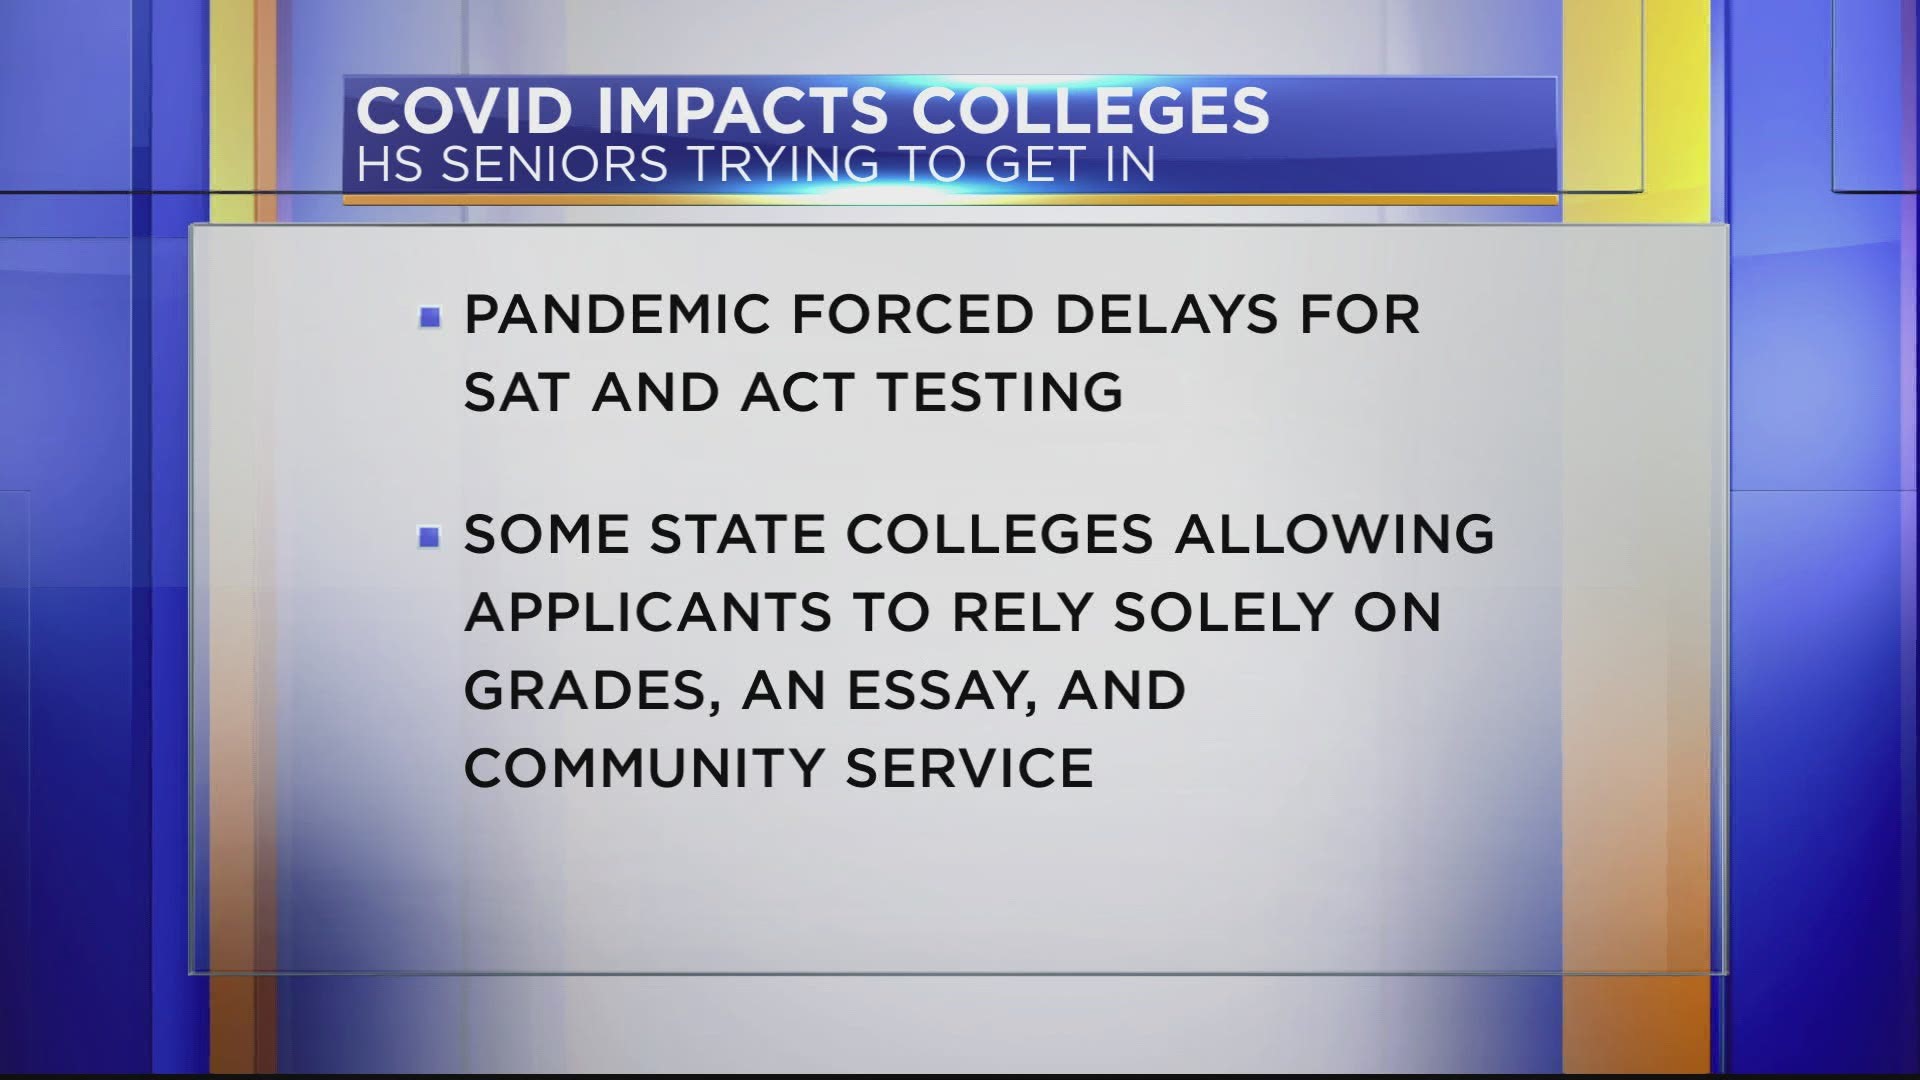 With SAT and ACT testing postponed, some colleges are changing how students apply.